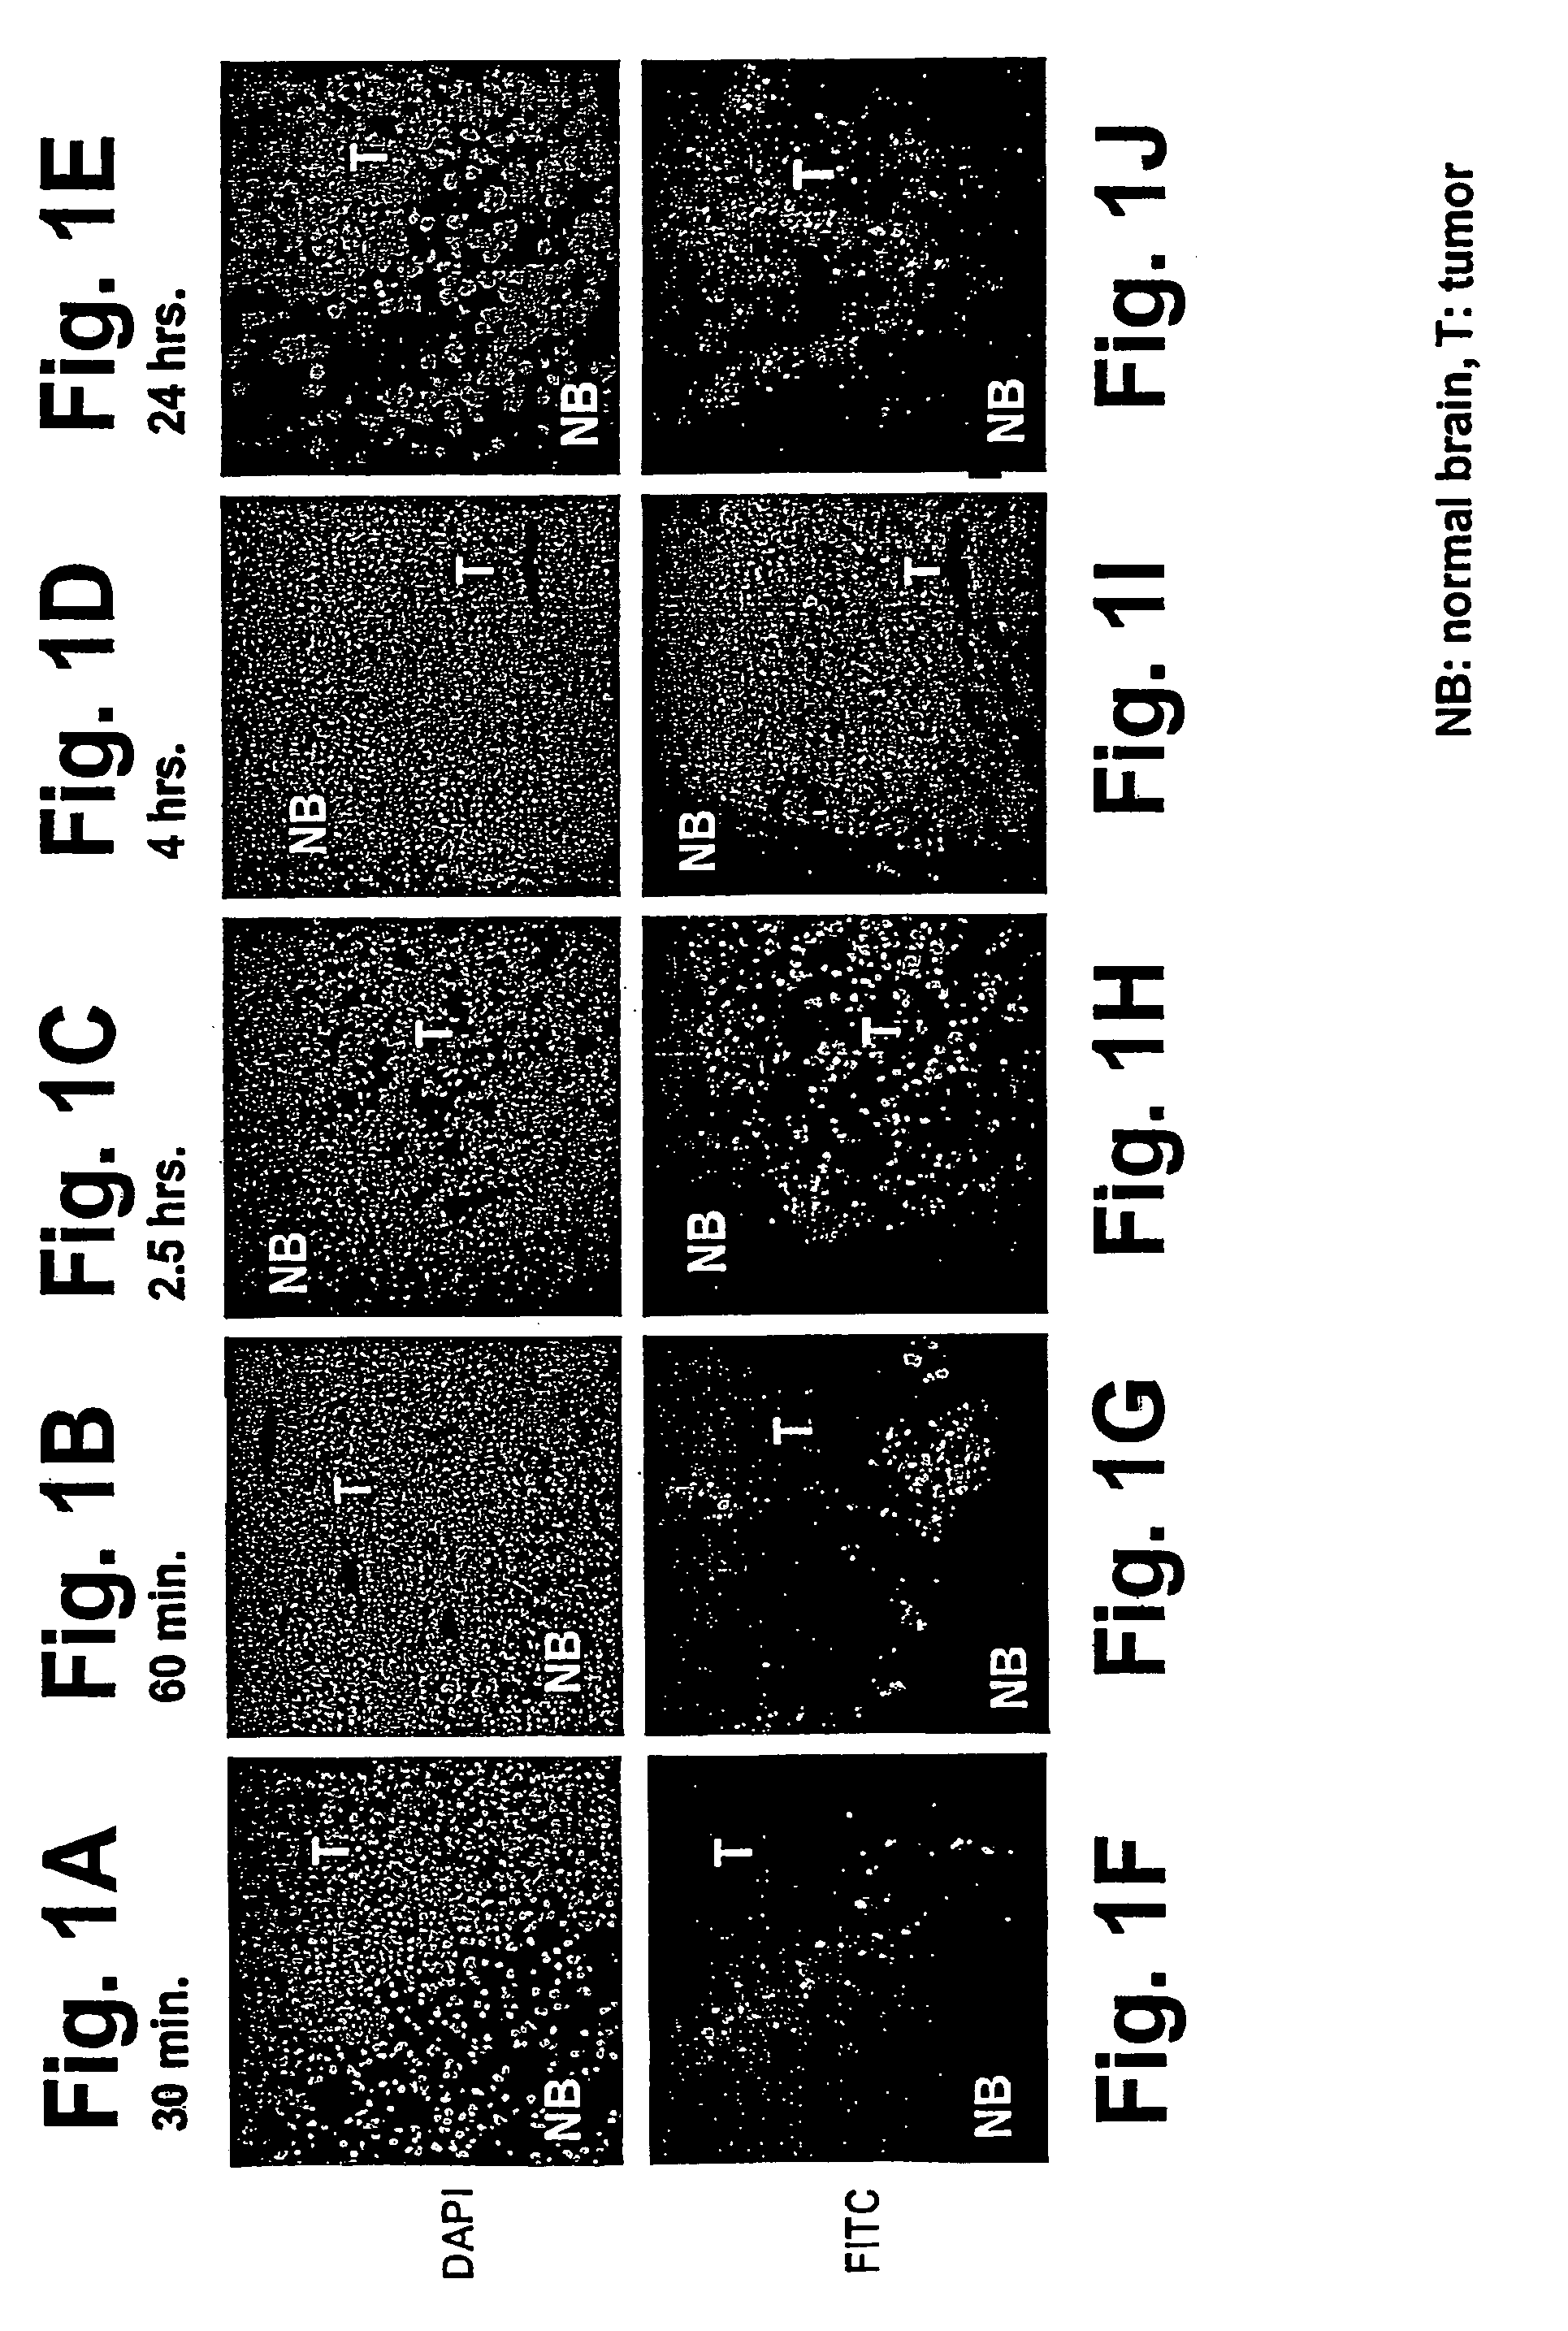 CNS-tumor treatment method and composition